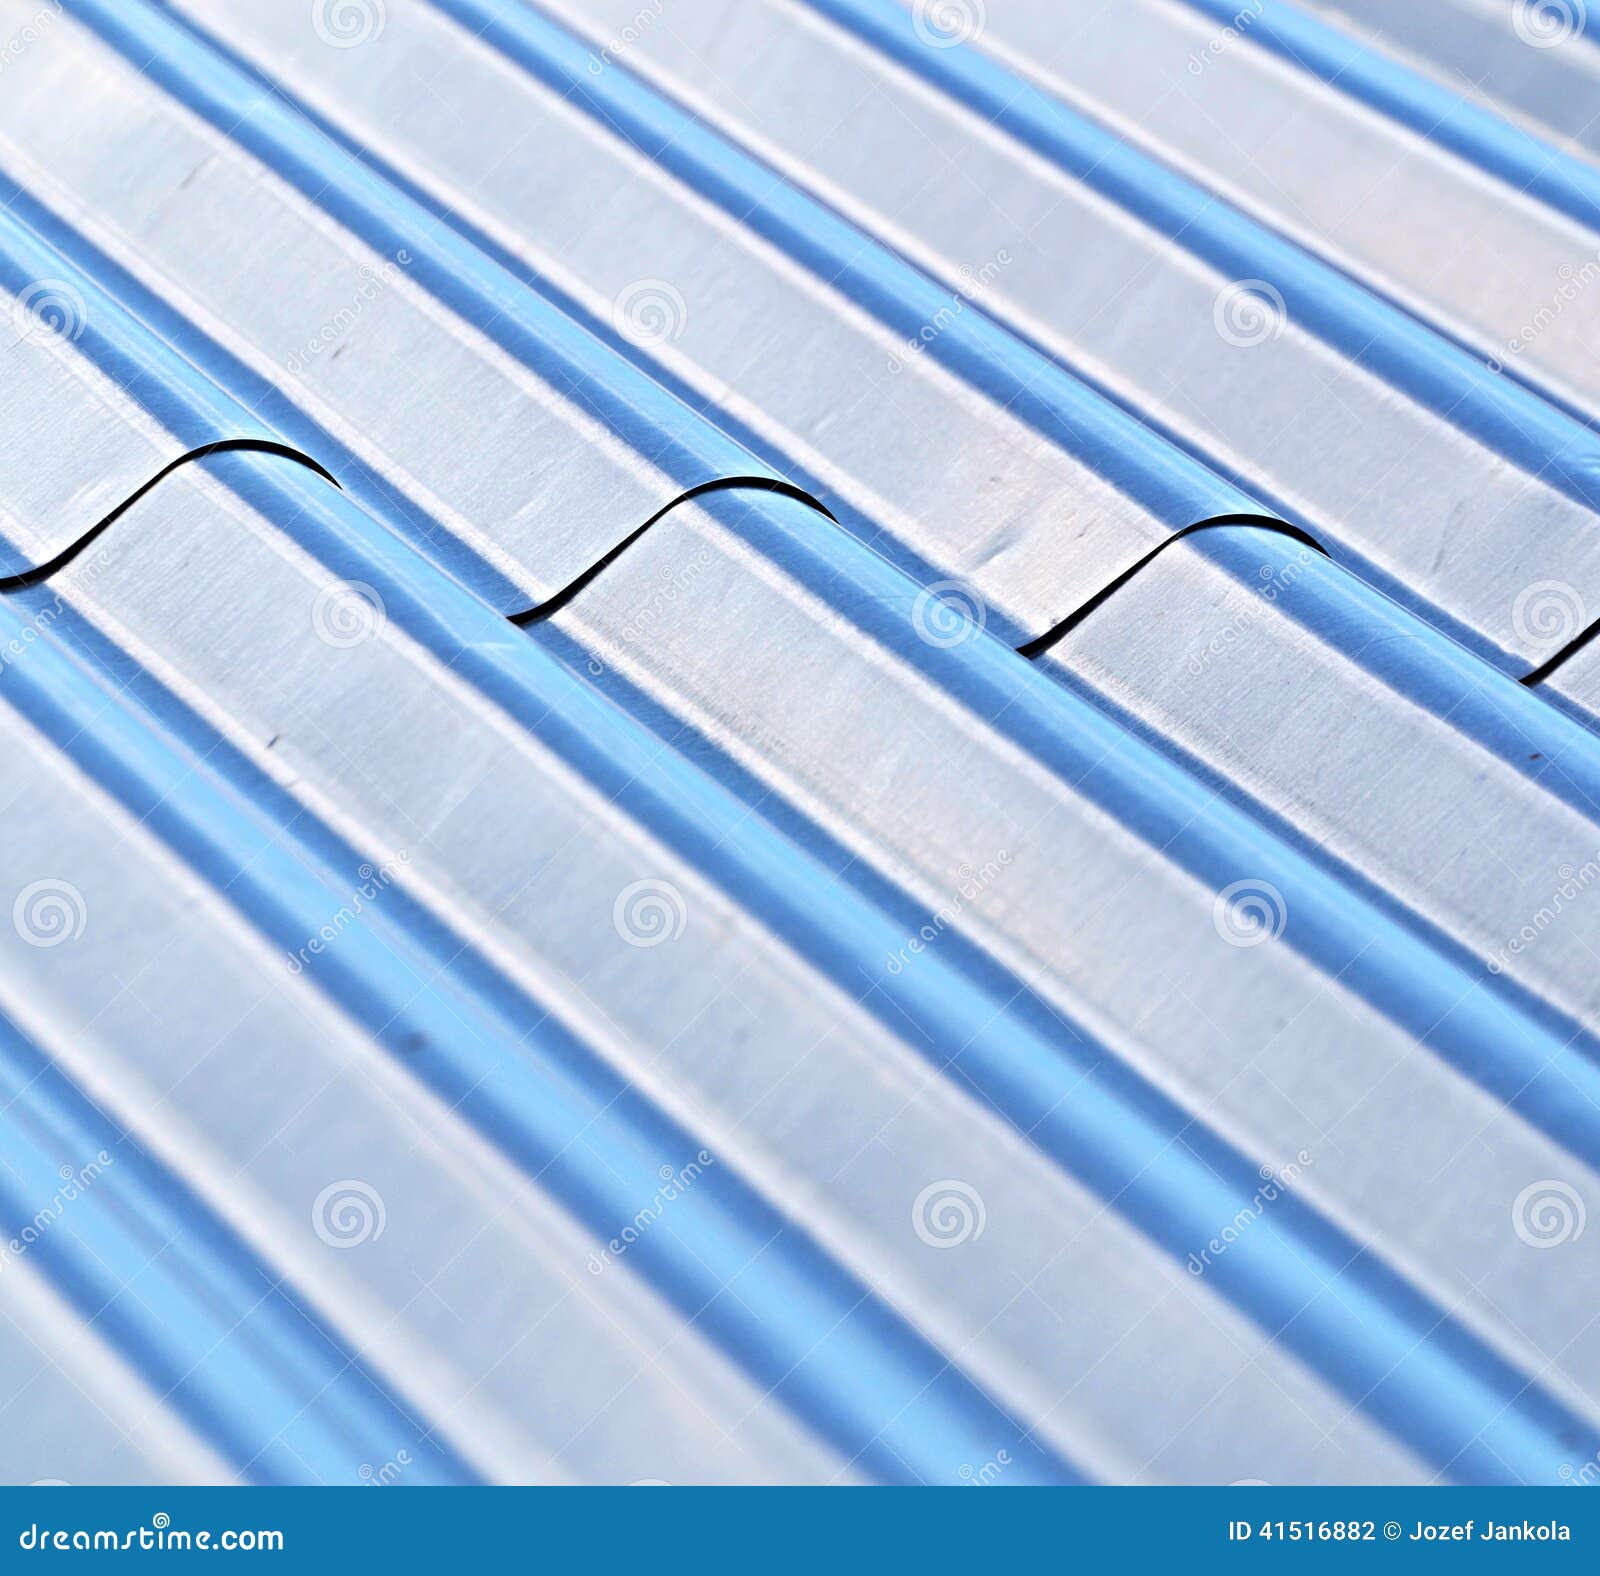 Steel roof stock photo. Image of industry, wall, architecture - 41516882